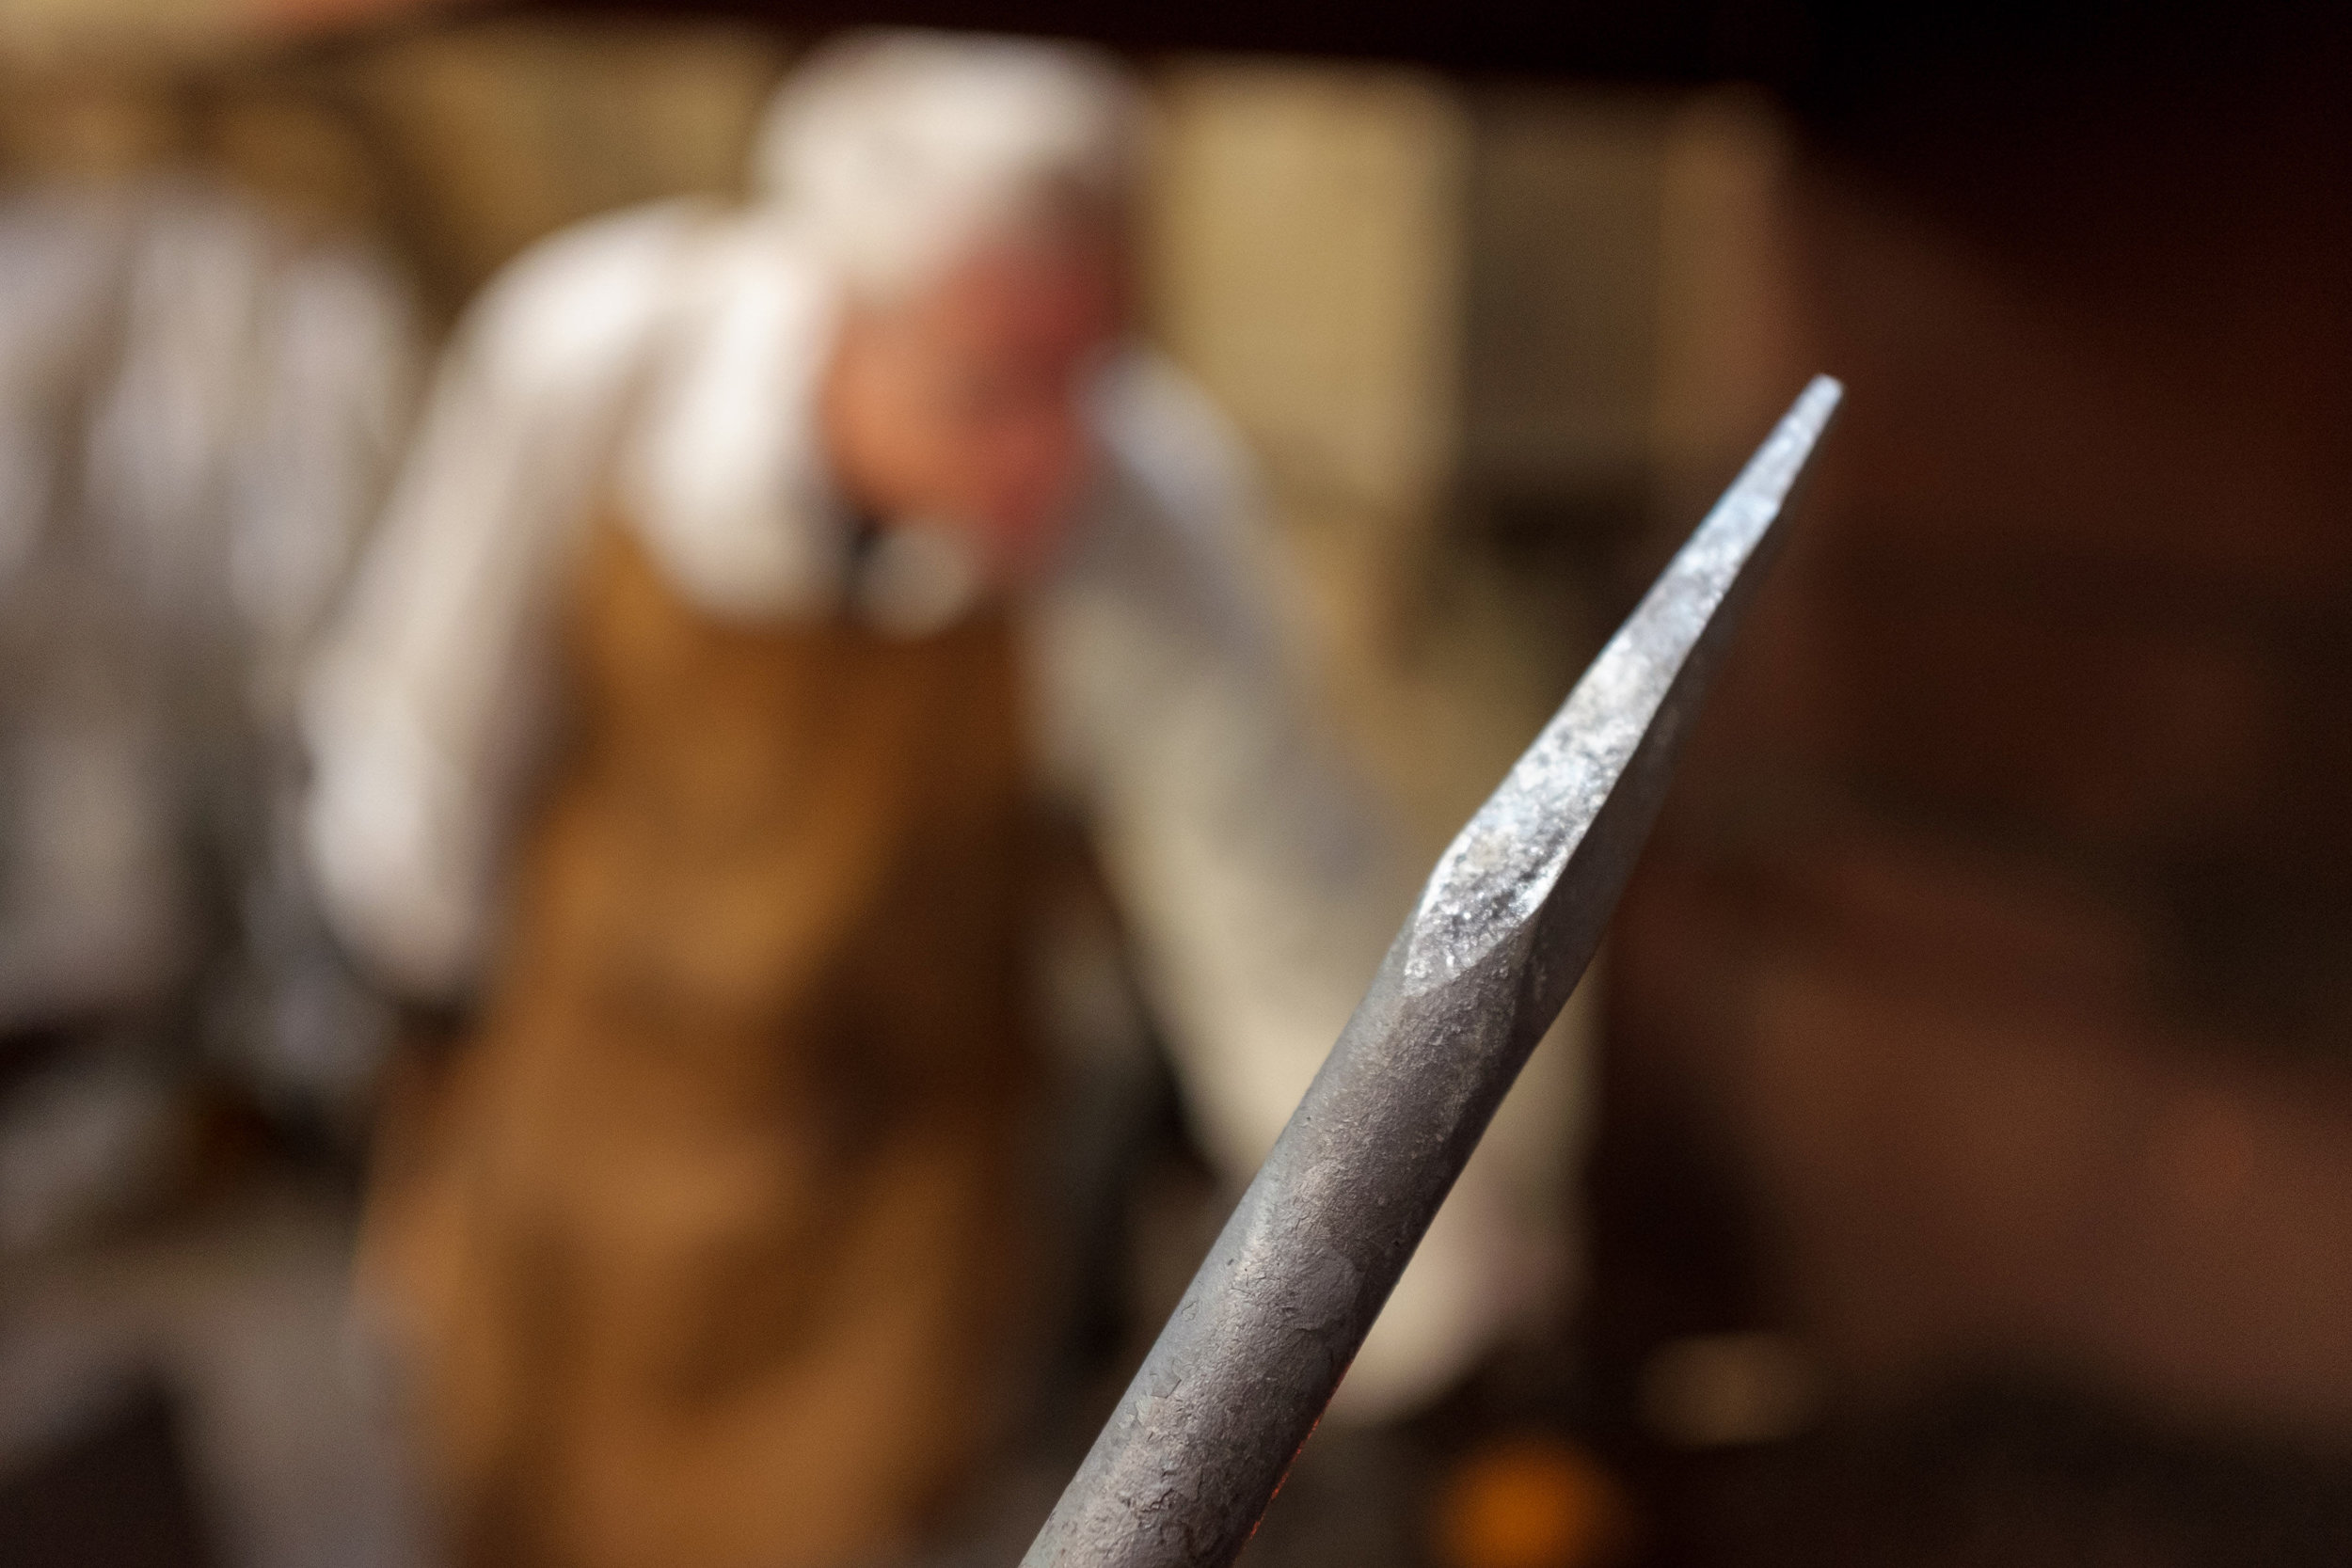 Hot-Metal-Works-Blacksmith-Experience-Workshop-Taper-Book-A-Workshop-With-Artistic-Blacksmith-Neil-Brown